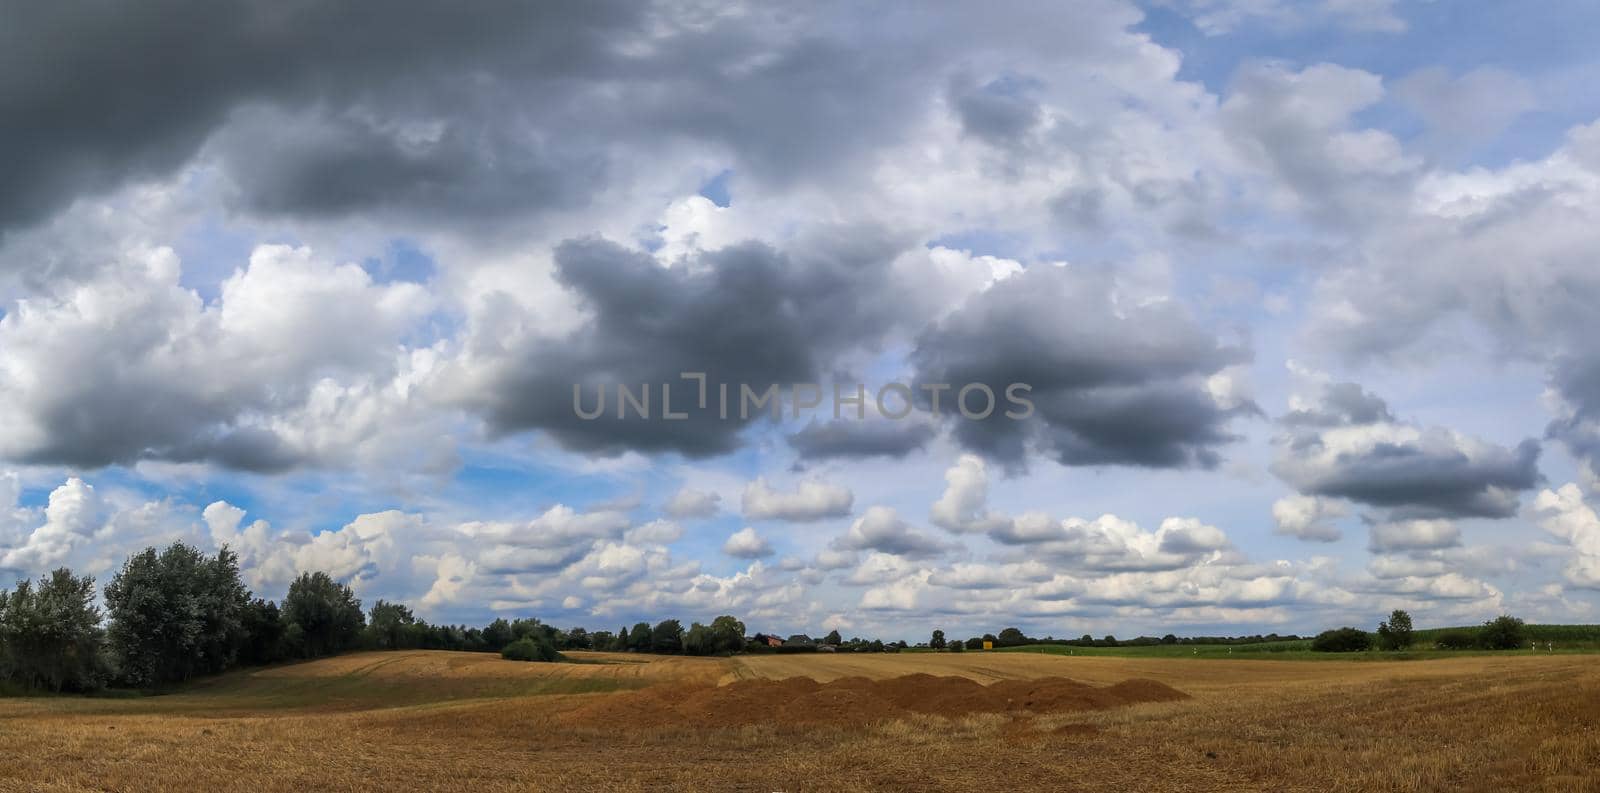 Beautiful high resolution panorama of a landscape with fields and green grass found in Denmark and Germany. by MP_foto71